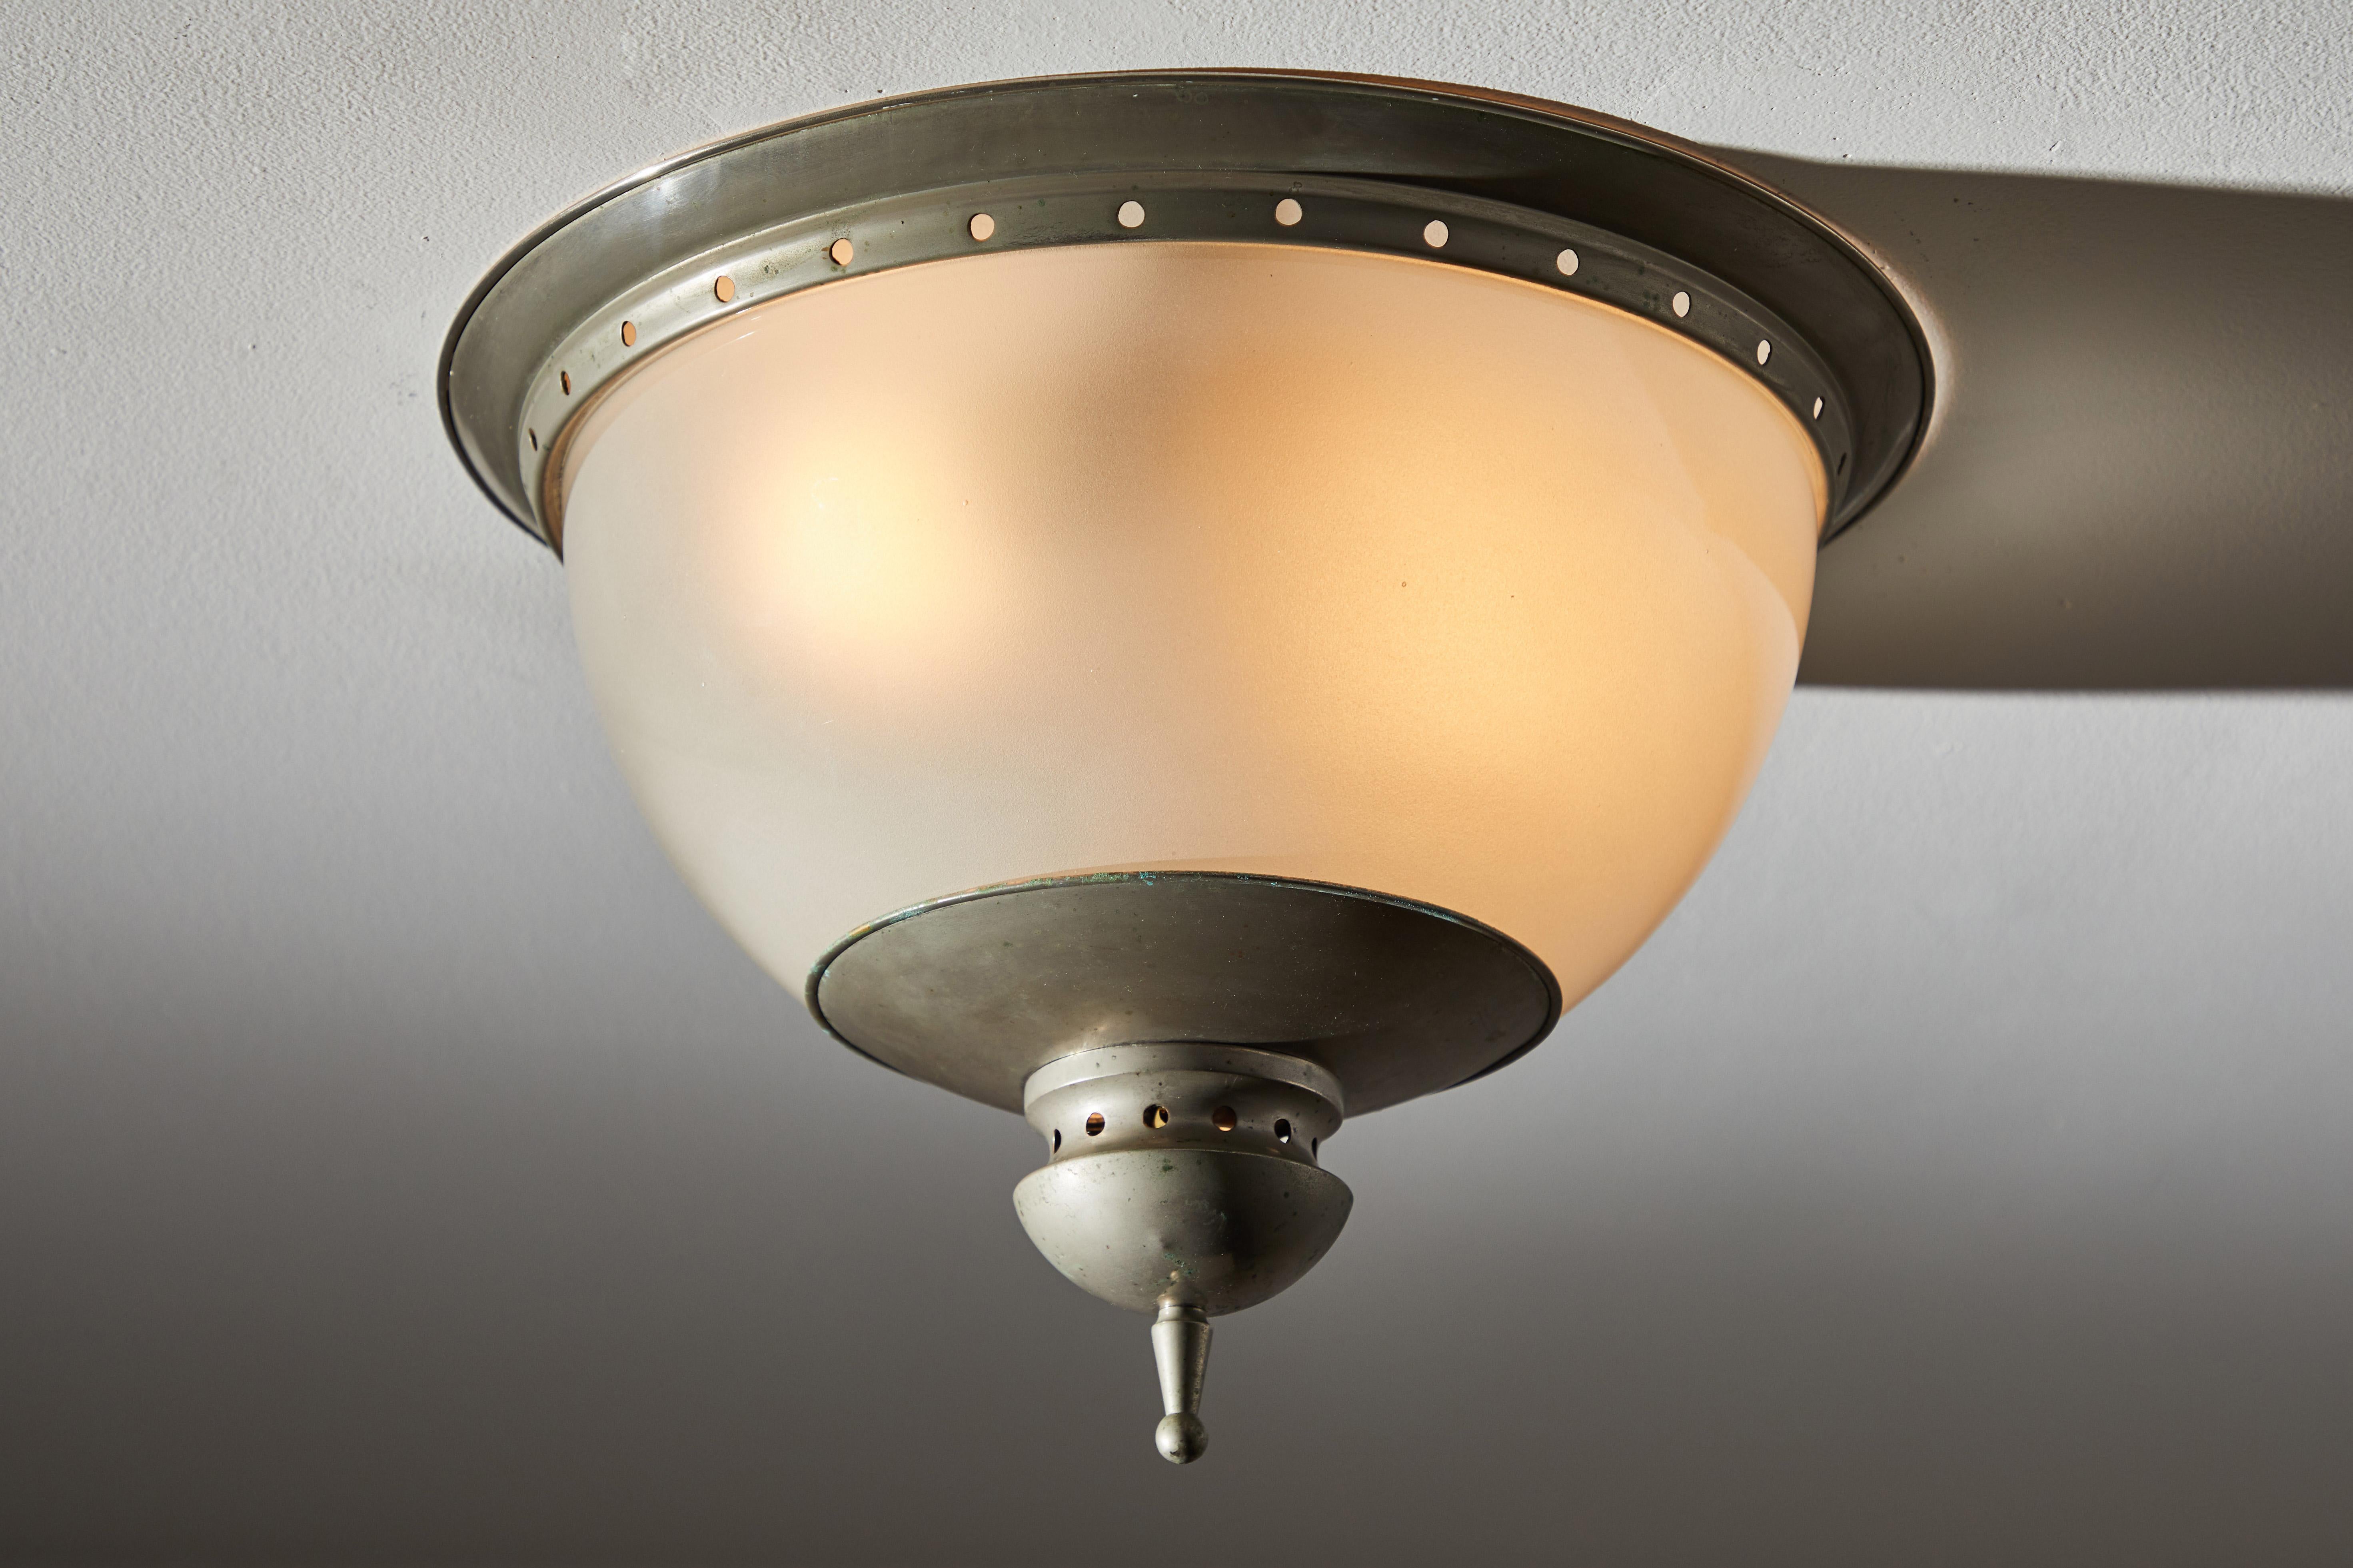 Mid-Century Modern Flush Mount Ceiling Light in the Style of Caccia Dominioni for Azucena For Sale